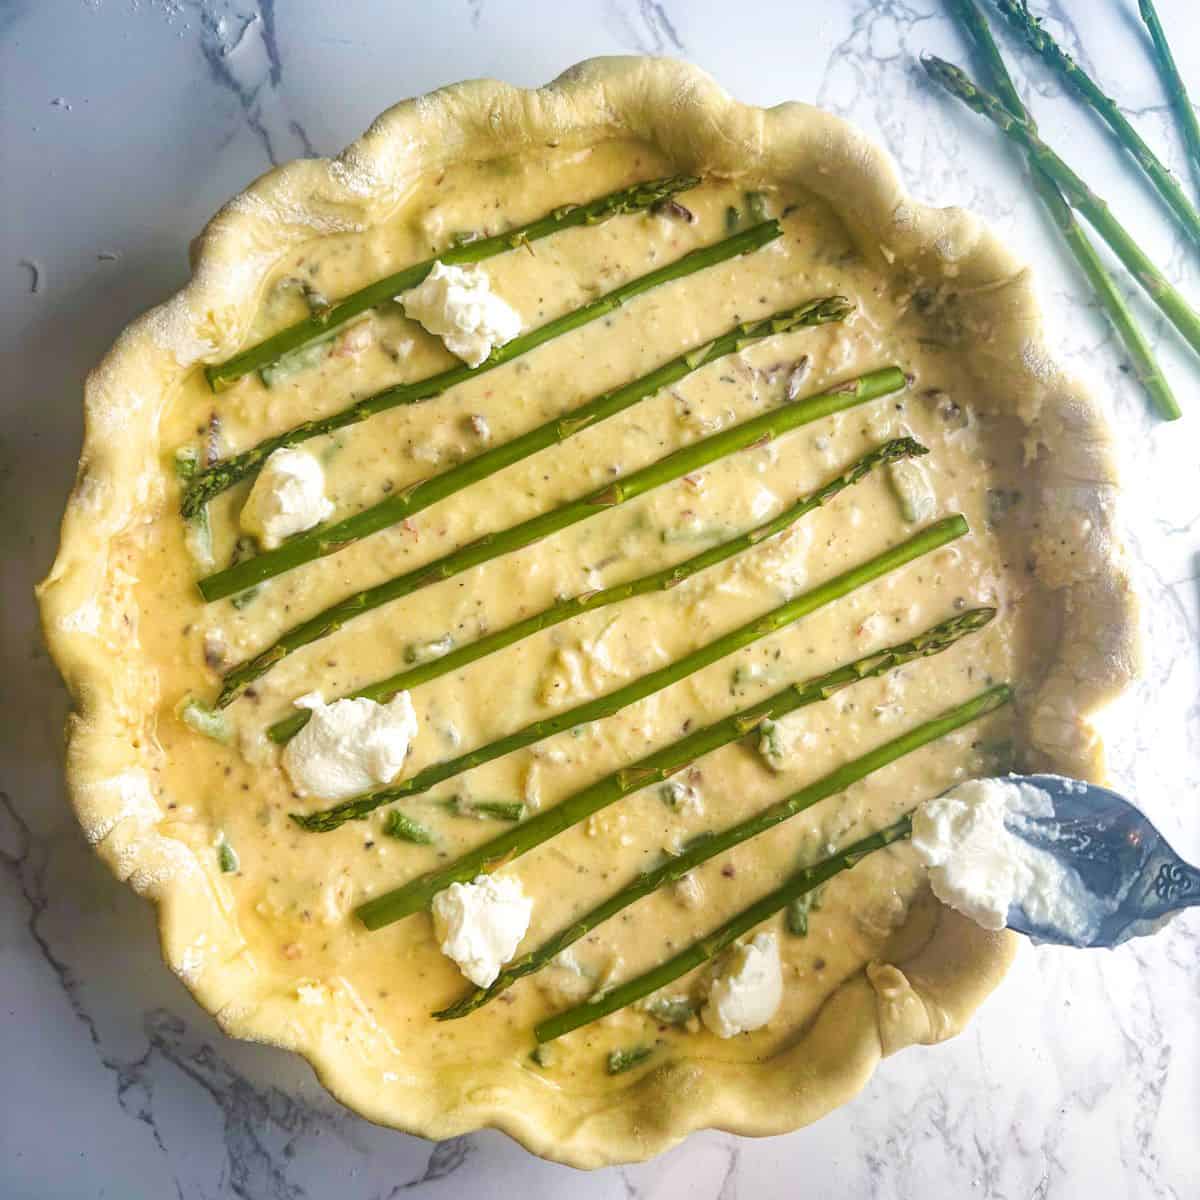 asparagus ricotta tart with spoon adding dollops of ricotta cheese